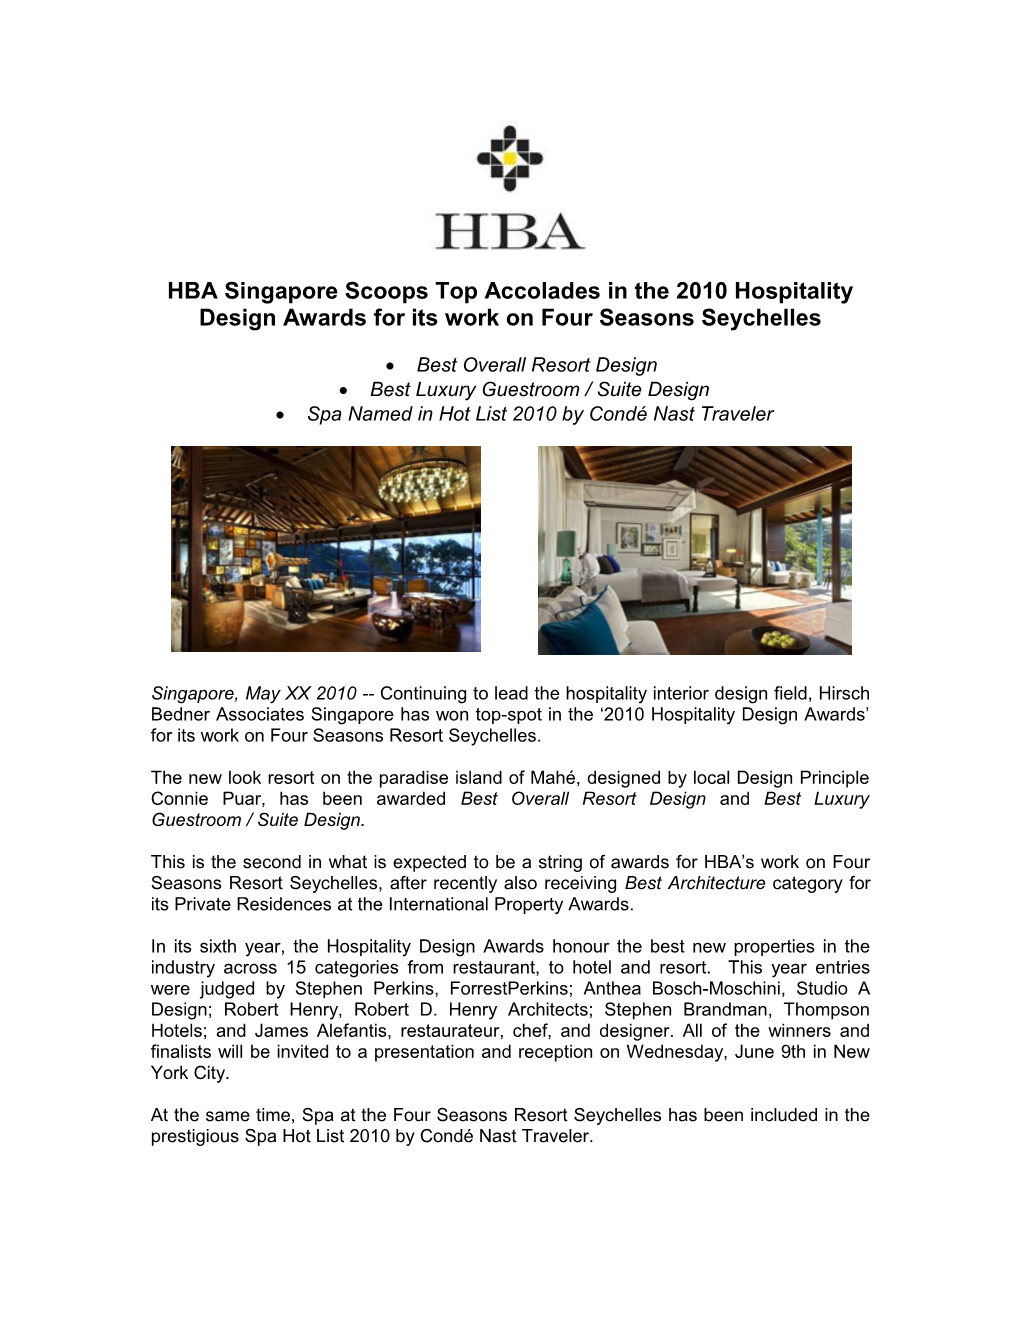 HBA Singapore Scoops Top Accolades in the 2010 Hospitality Design Awards for Its Work